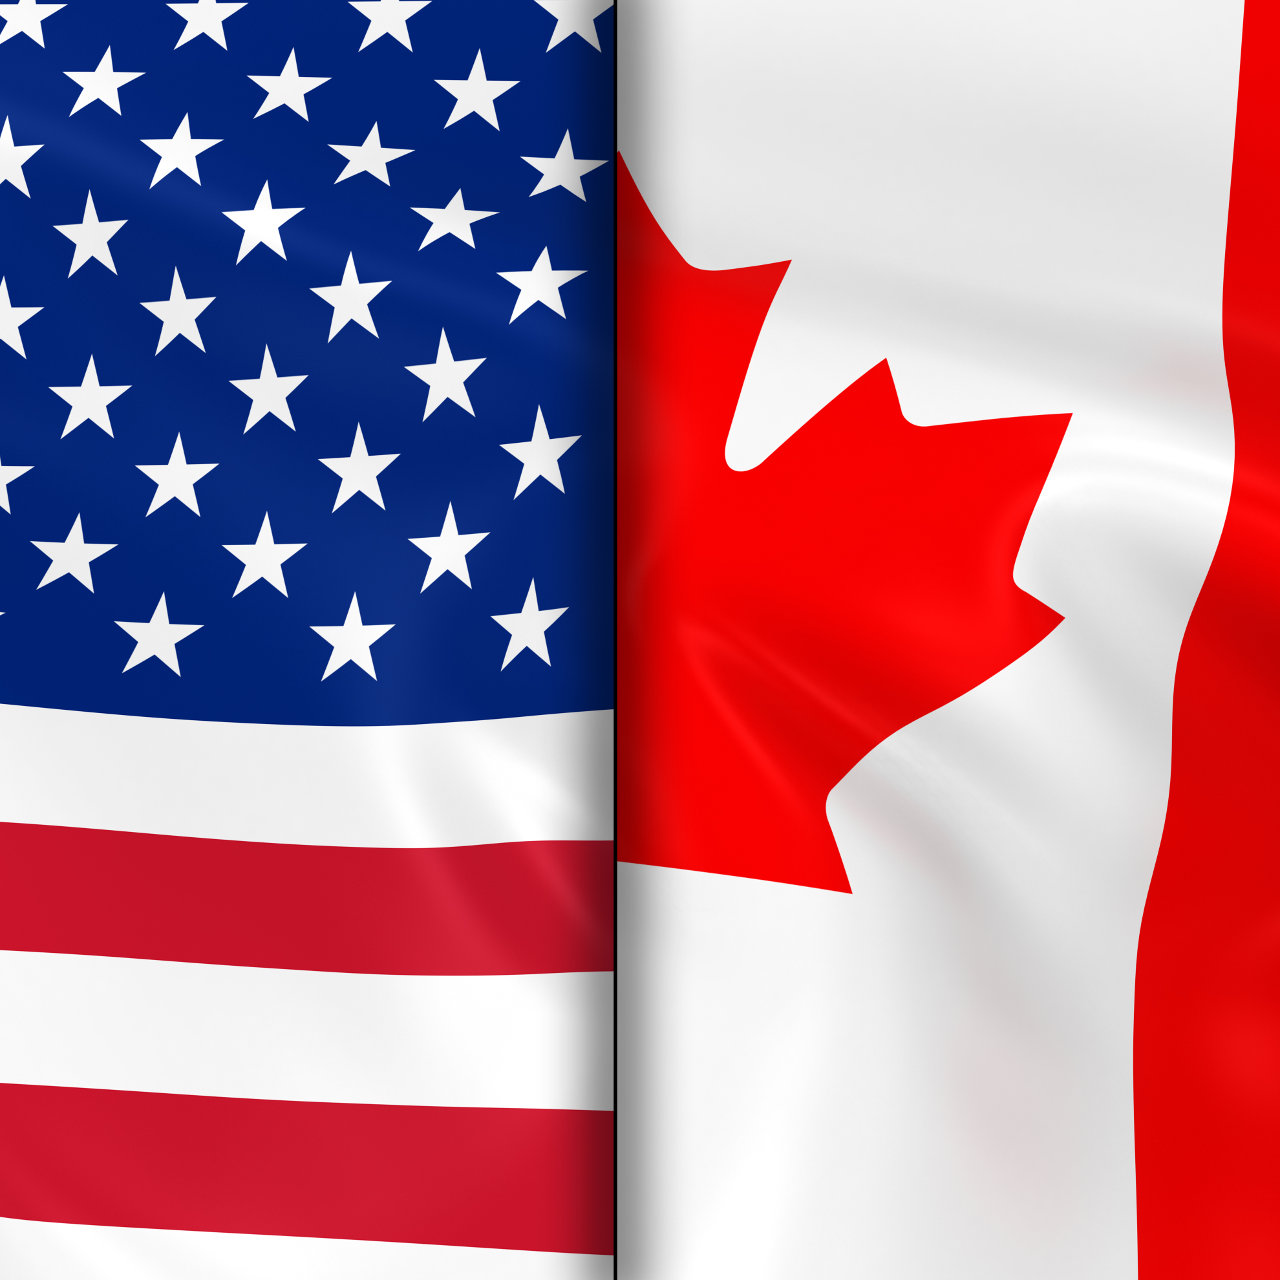 USA and Canada release joint advisory against ransomware